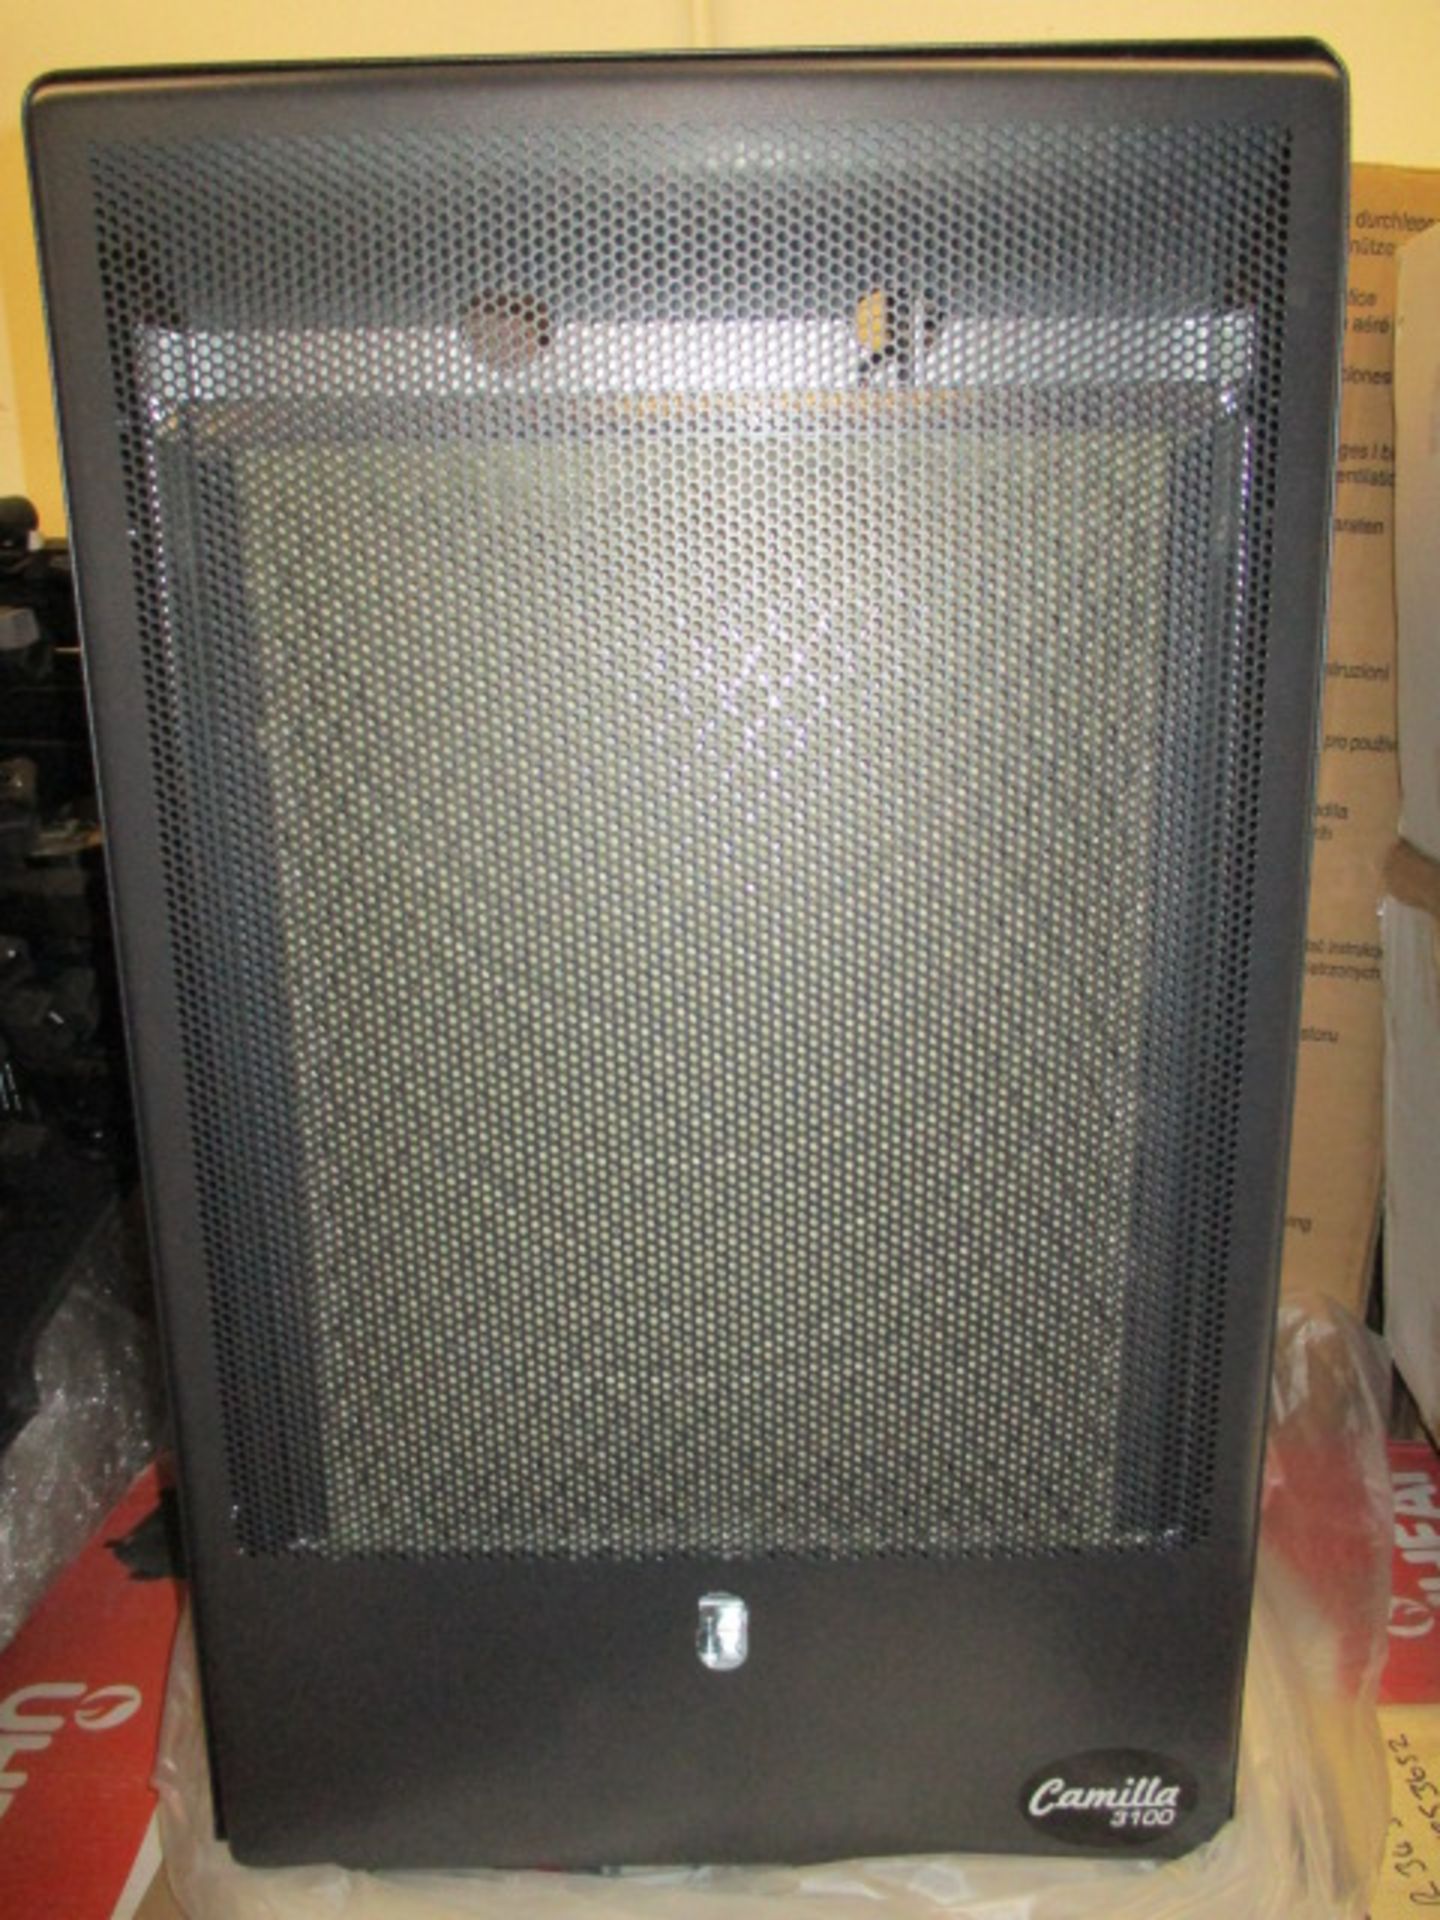 Camilla 3100 Catalytic gas heater brand new in box RRP £119.99